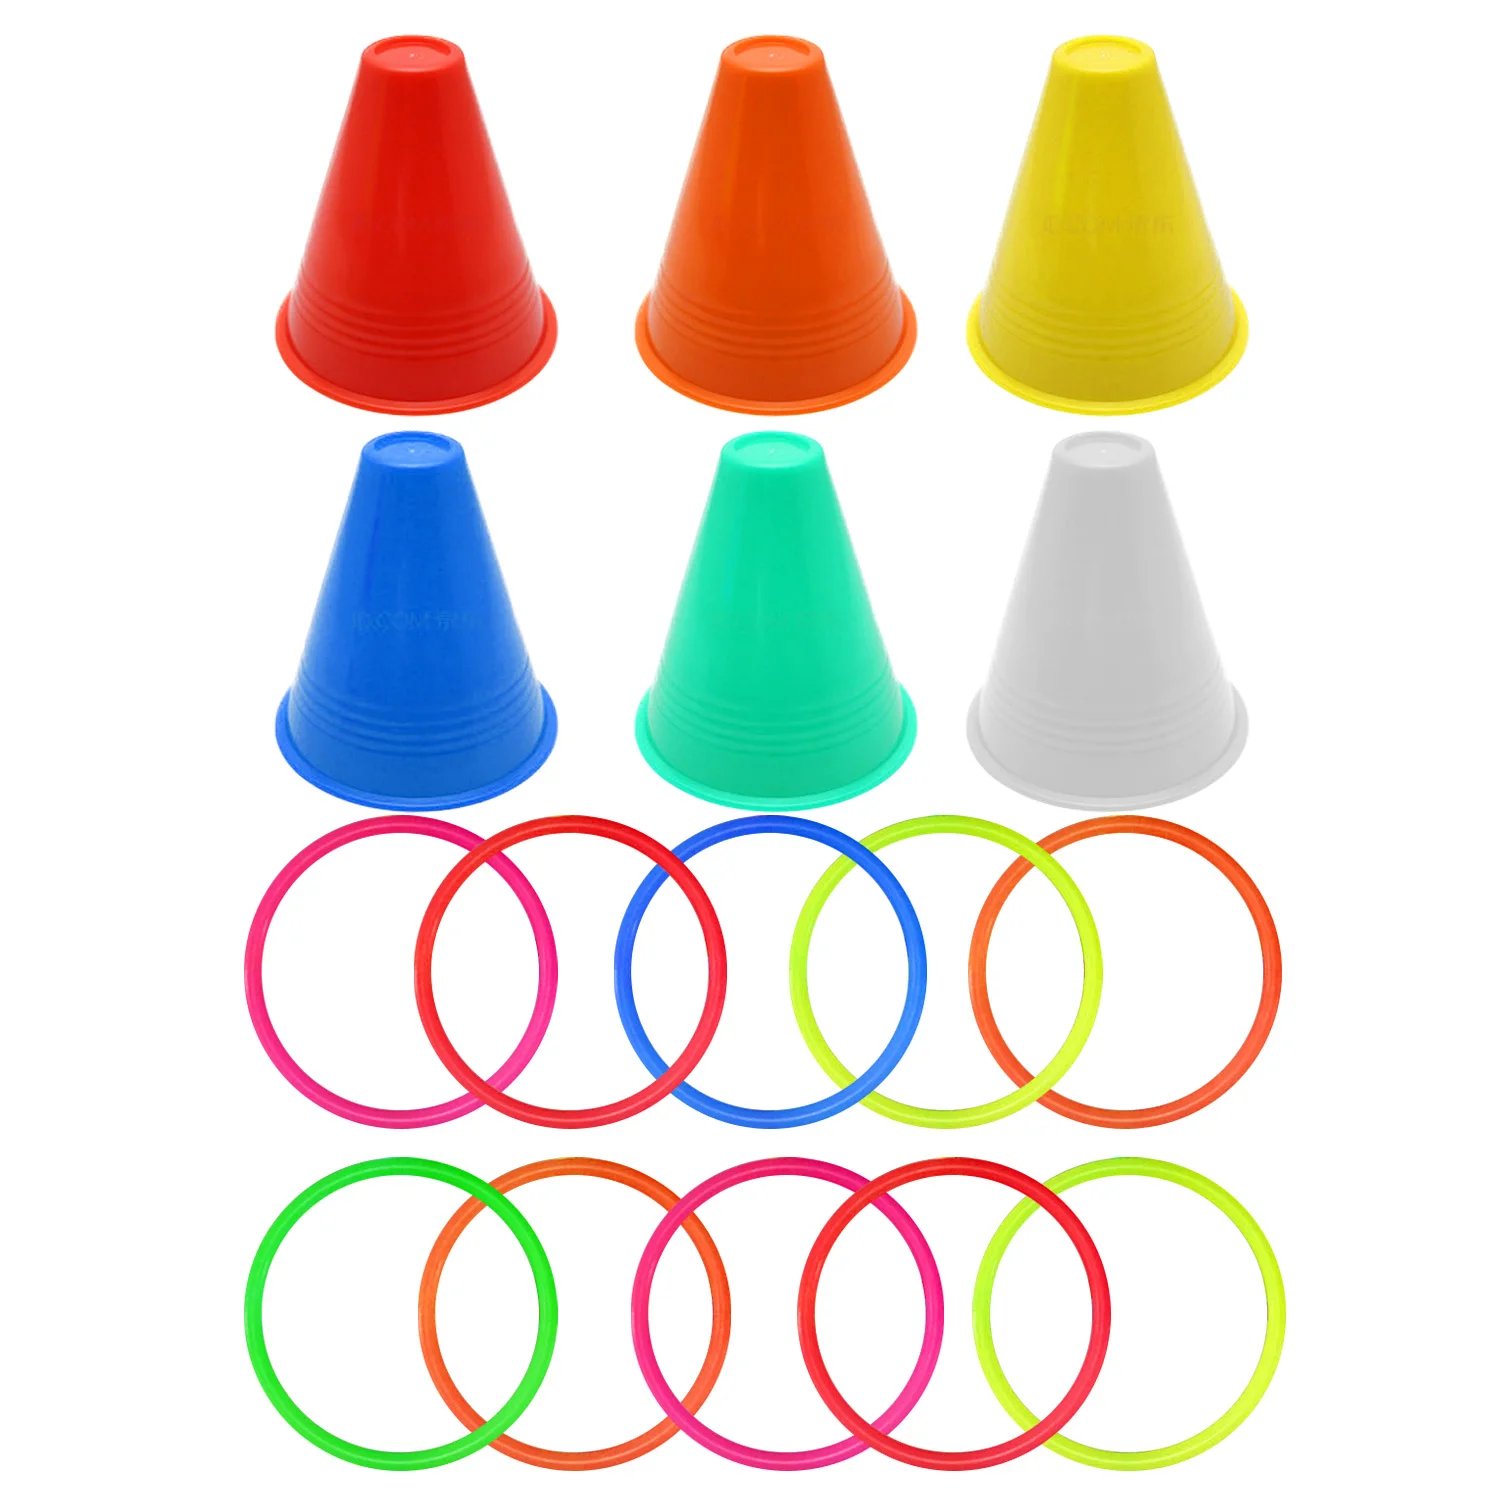 

16pcs Carnival Combo Set 10pcs Ring Toss Rings with 6pcs Plastic Cone for Children Kids Party Game Toys